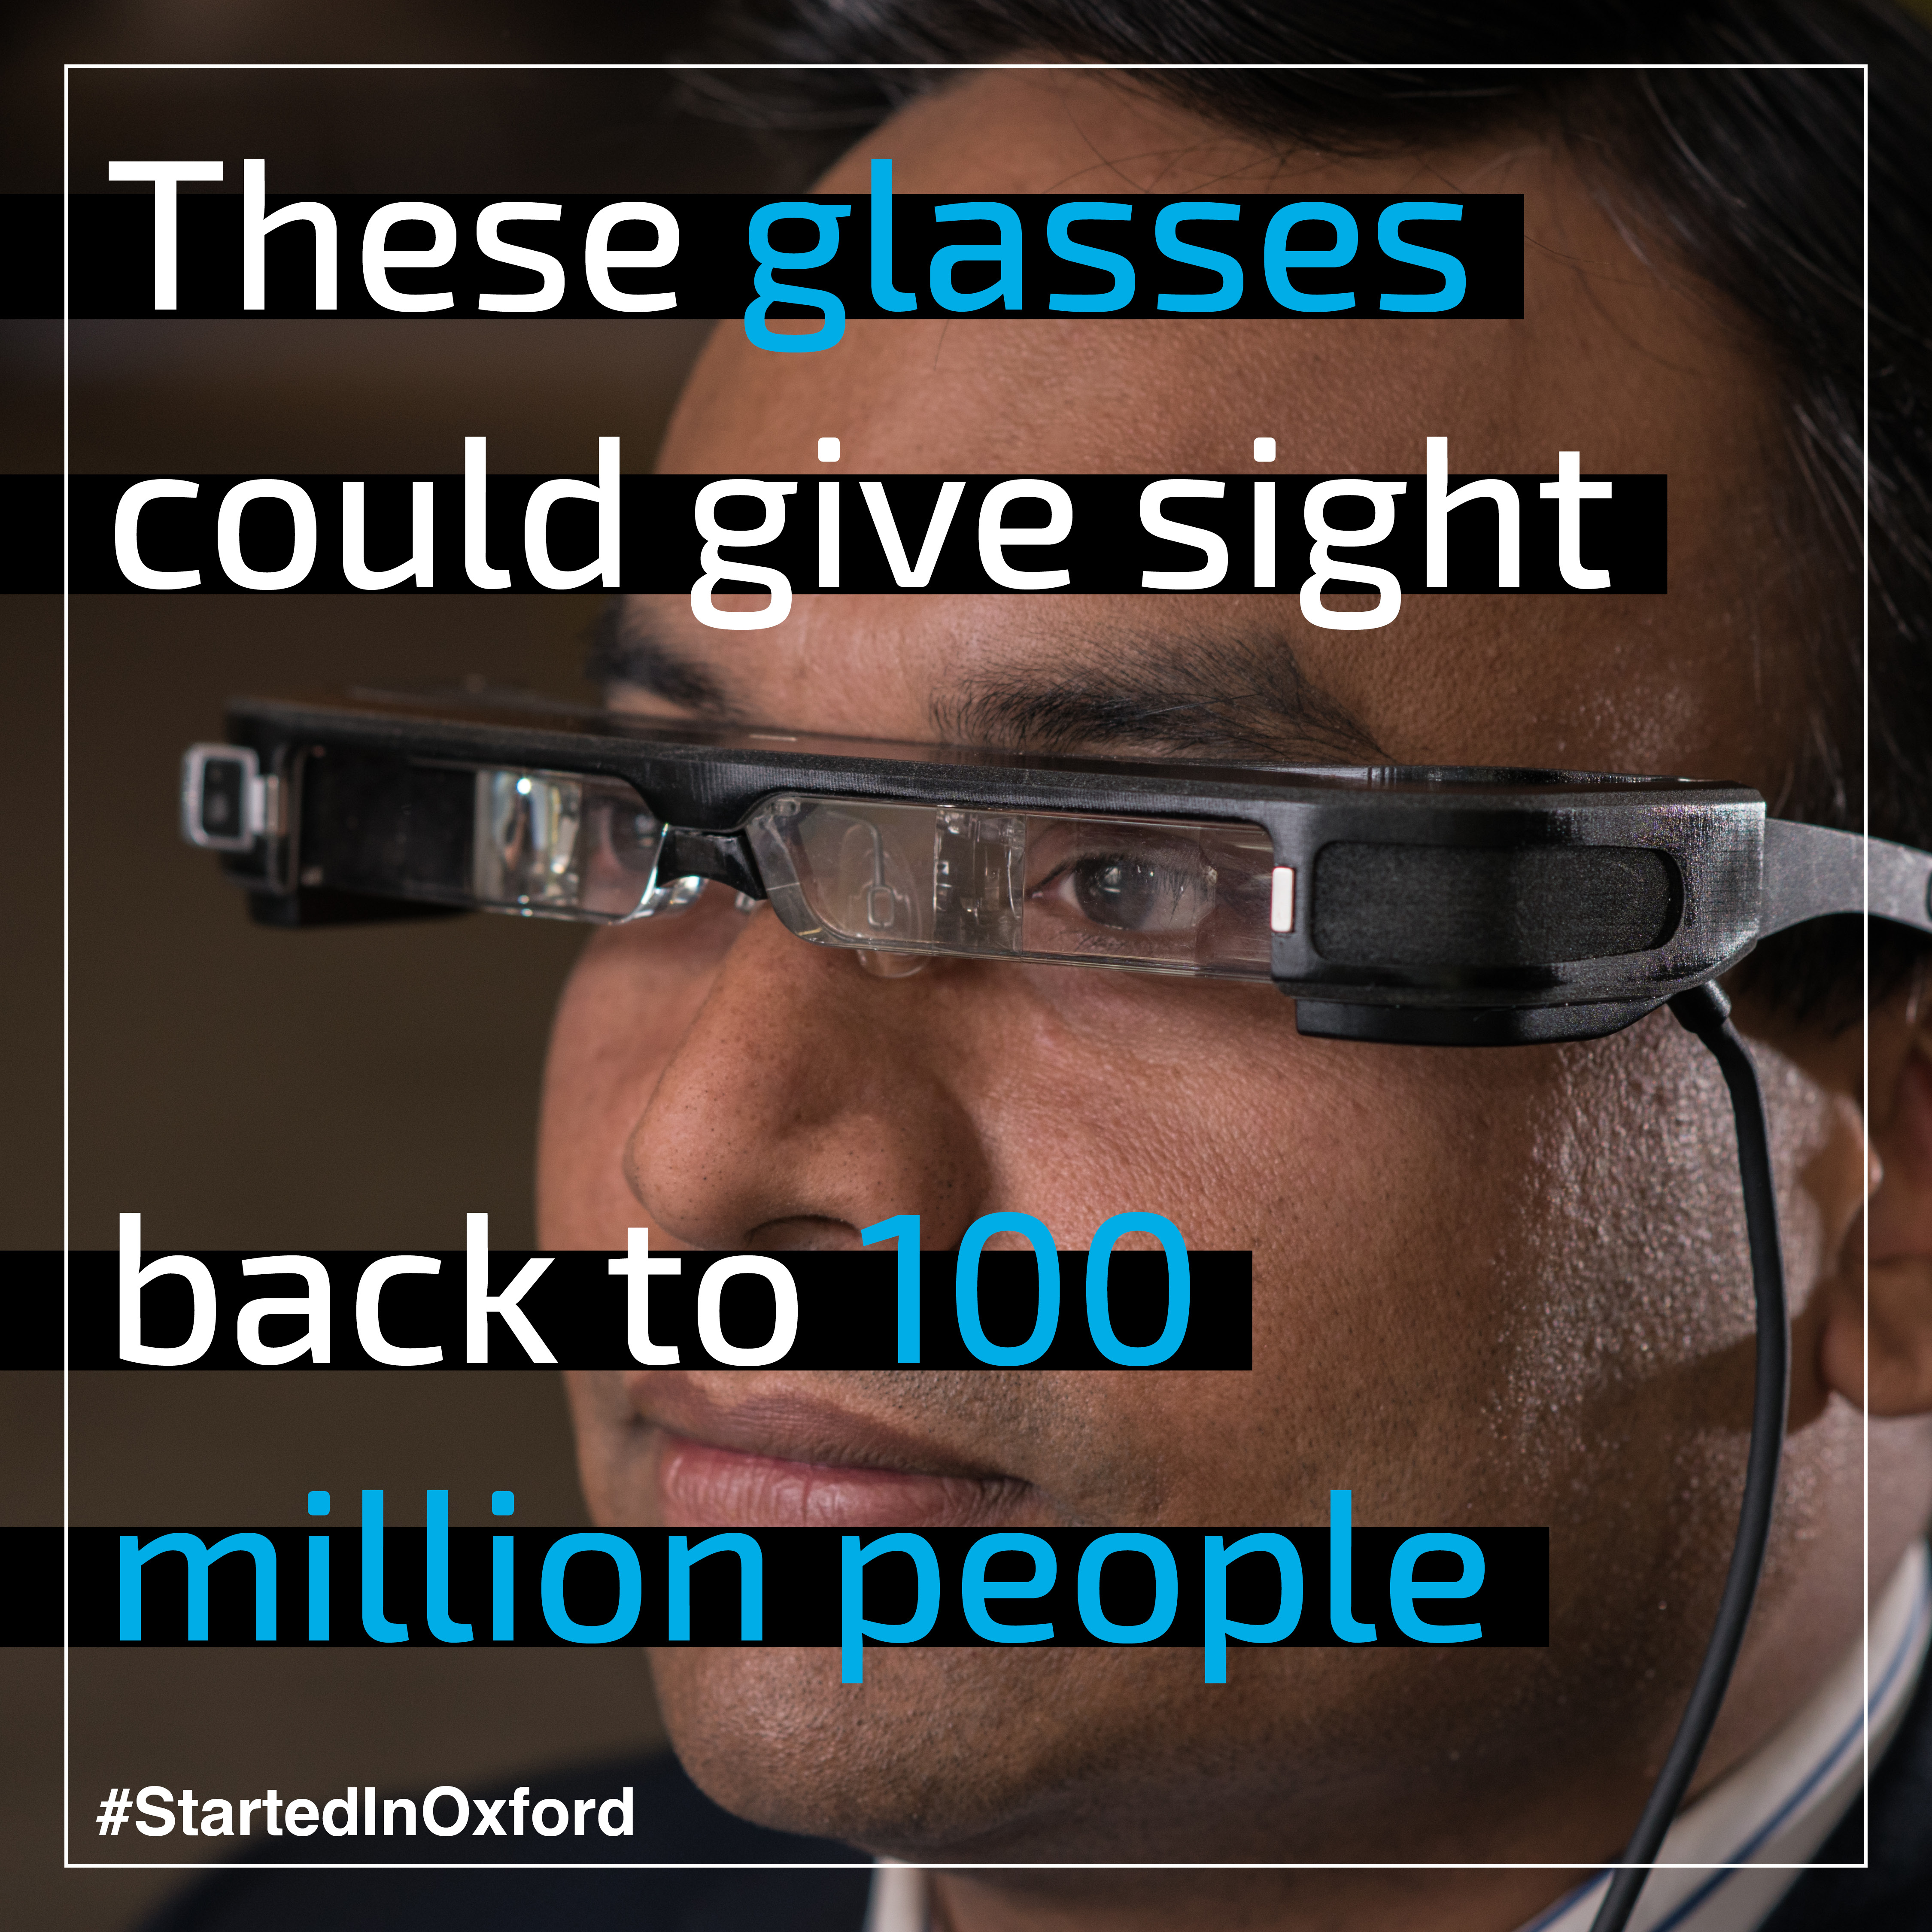 These glasses could give sight